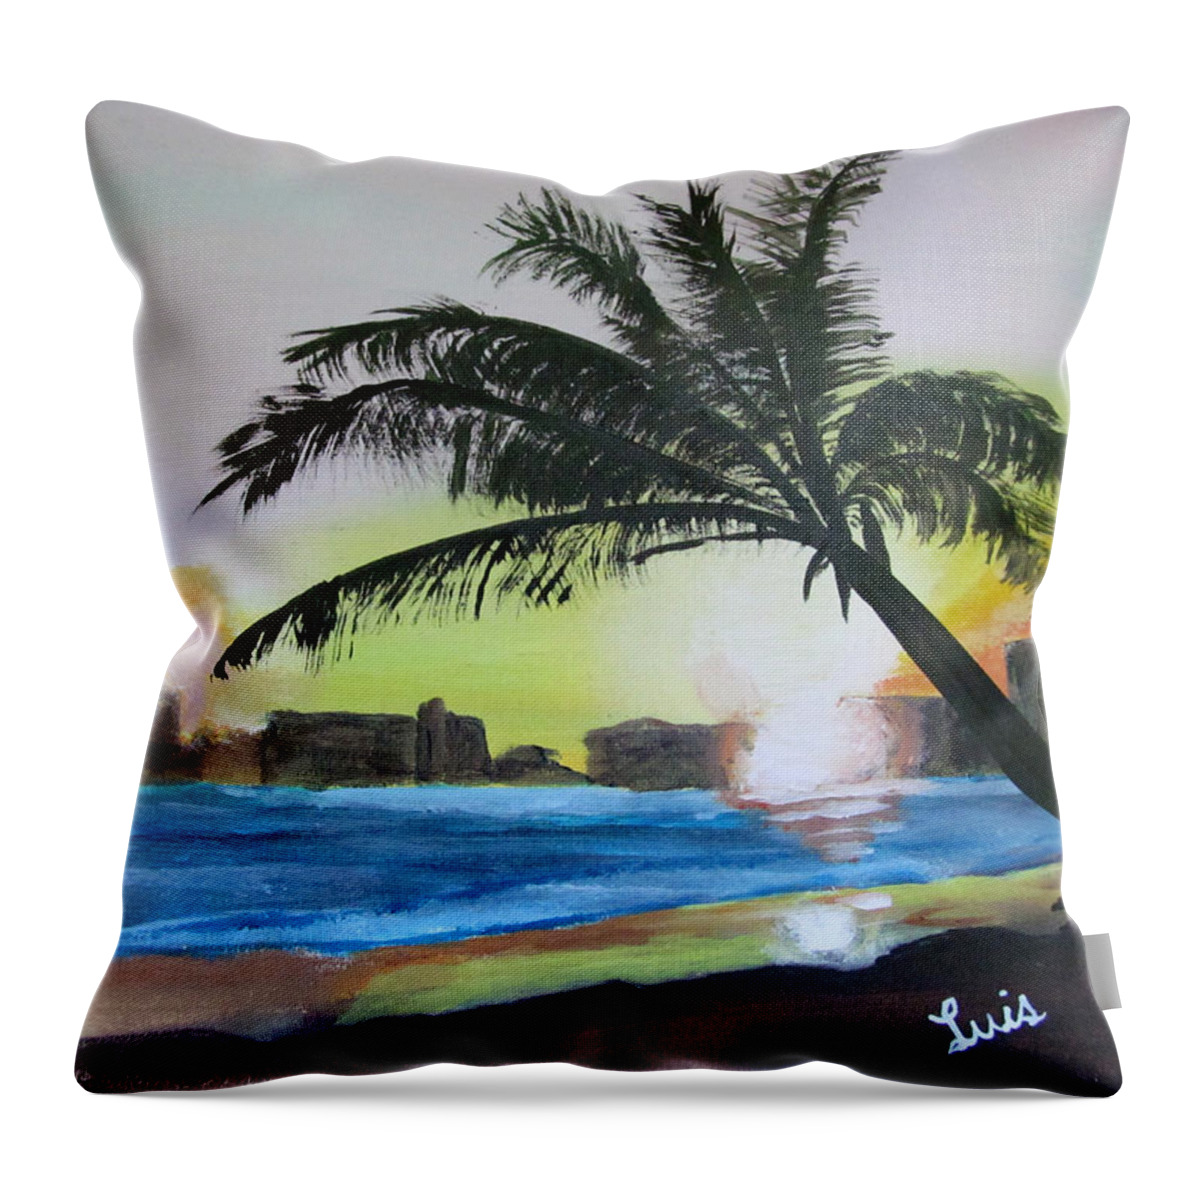 Isla Verde Throw Pillow featuring the photograph Isla Verde by Luis F Rodriguez